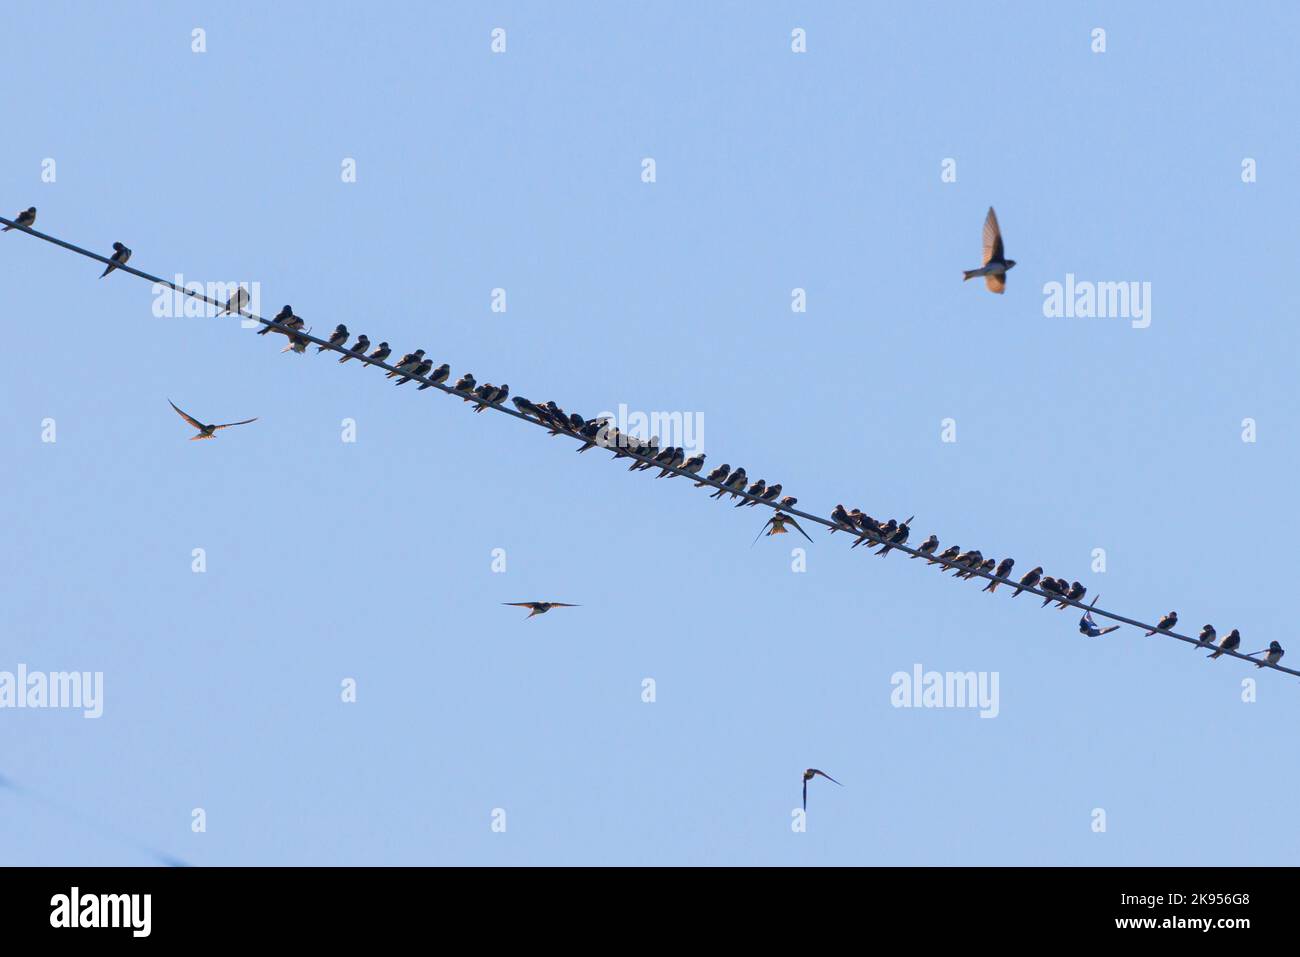 sand martin (Riparia riparia), lots of sand martins resting on a power line during migration, Germany, Bavaria Stock Photo